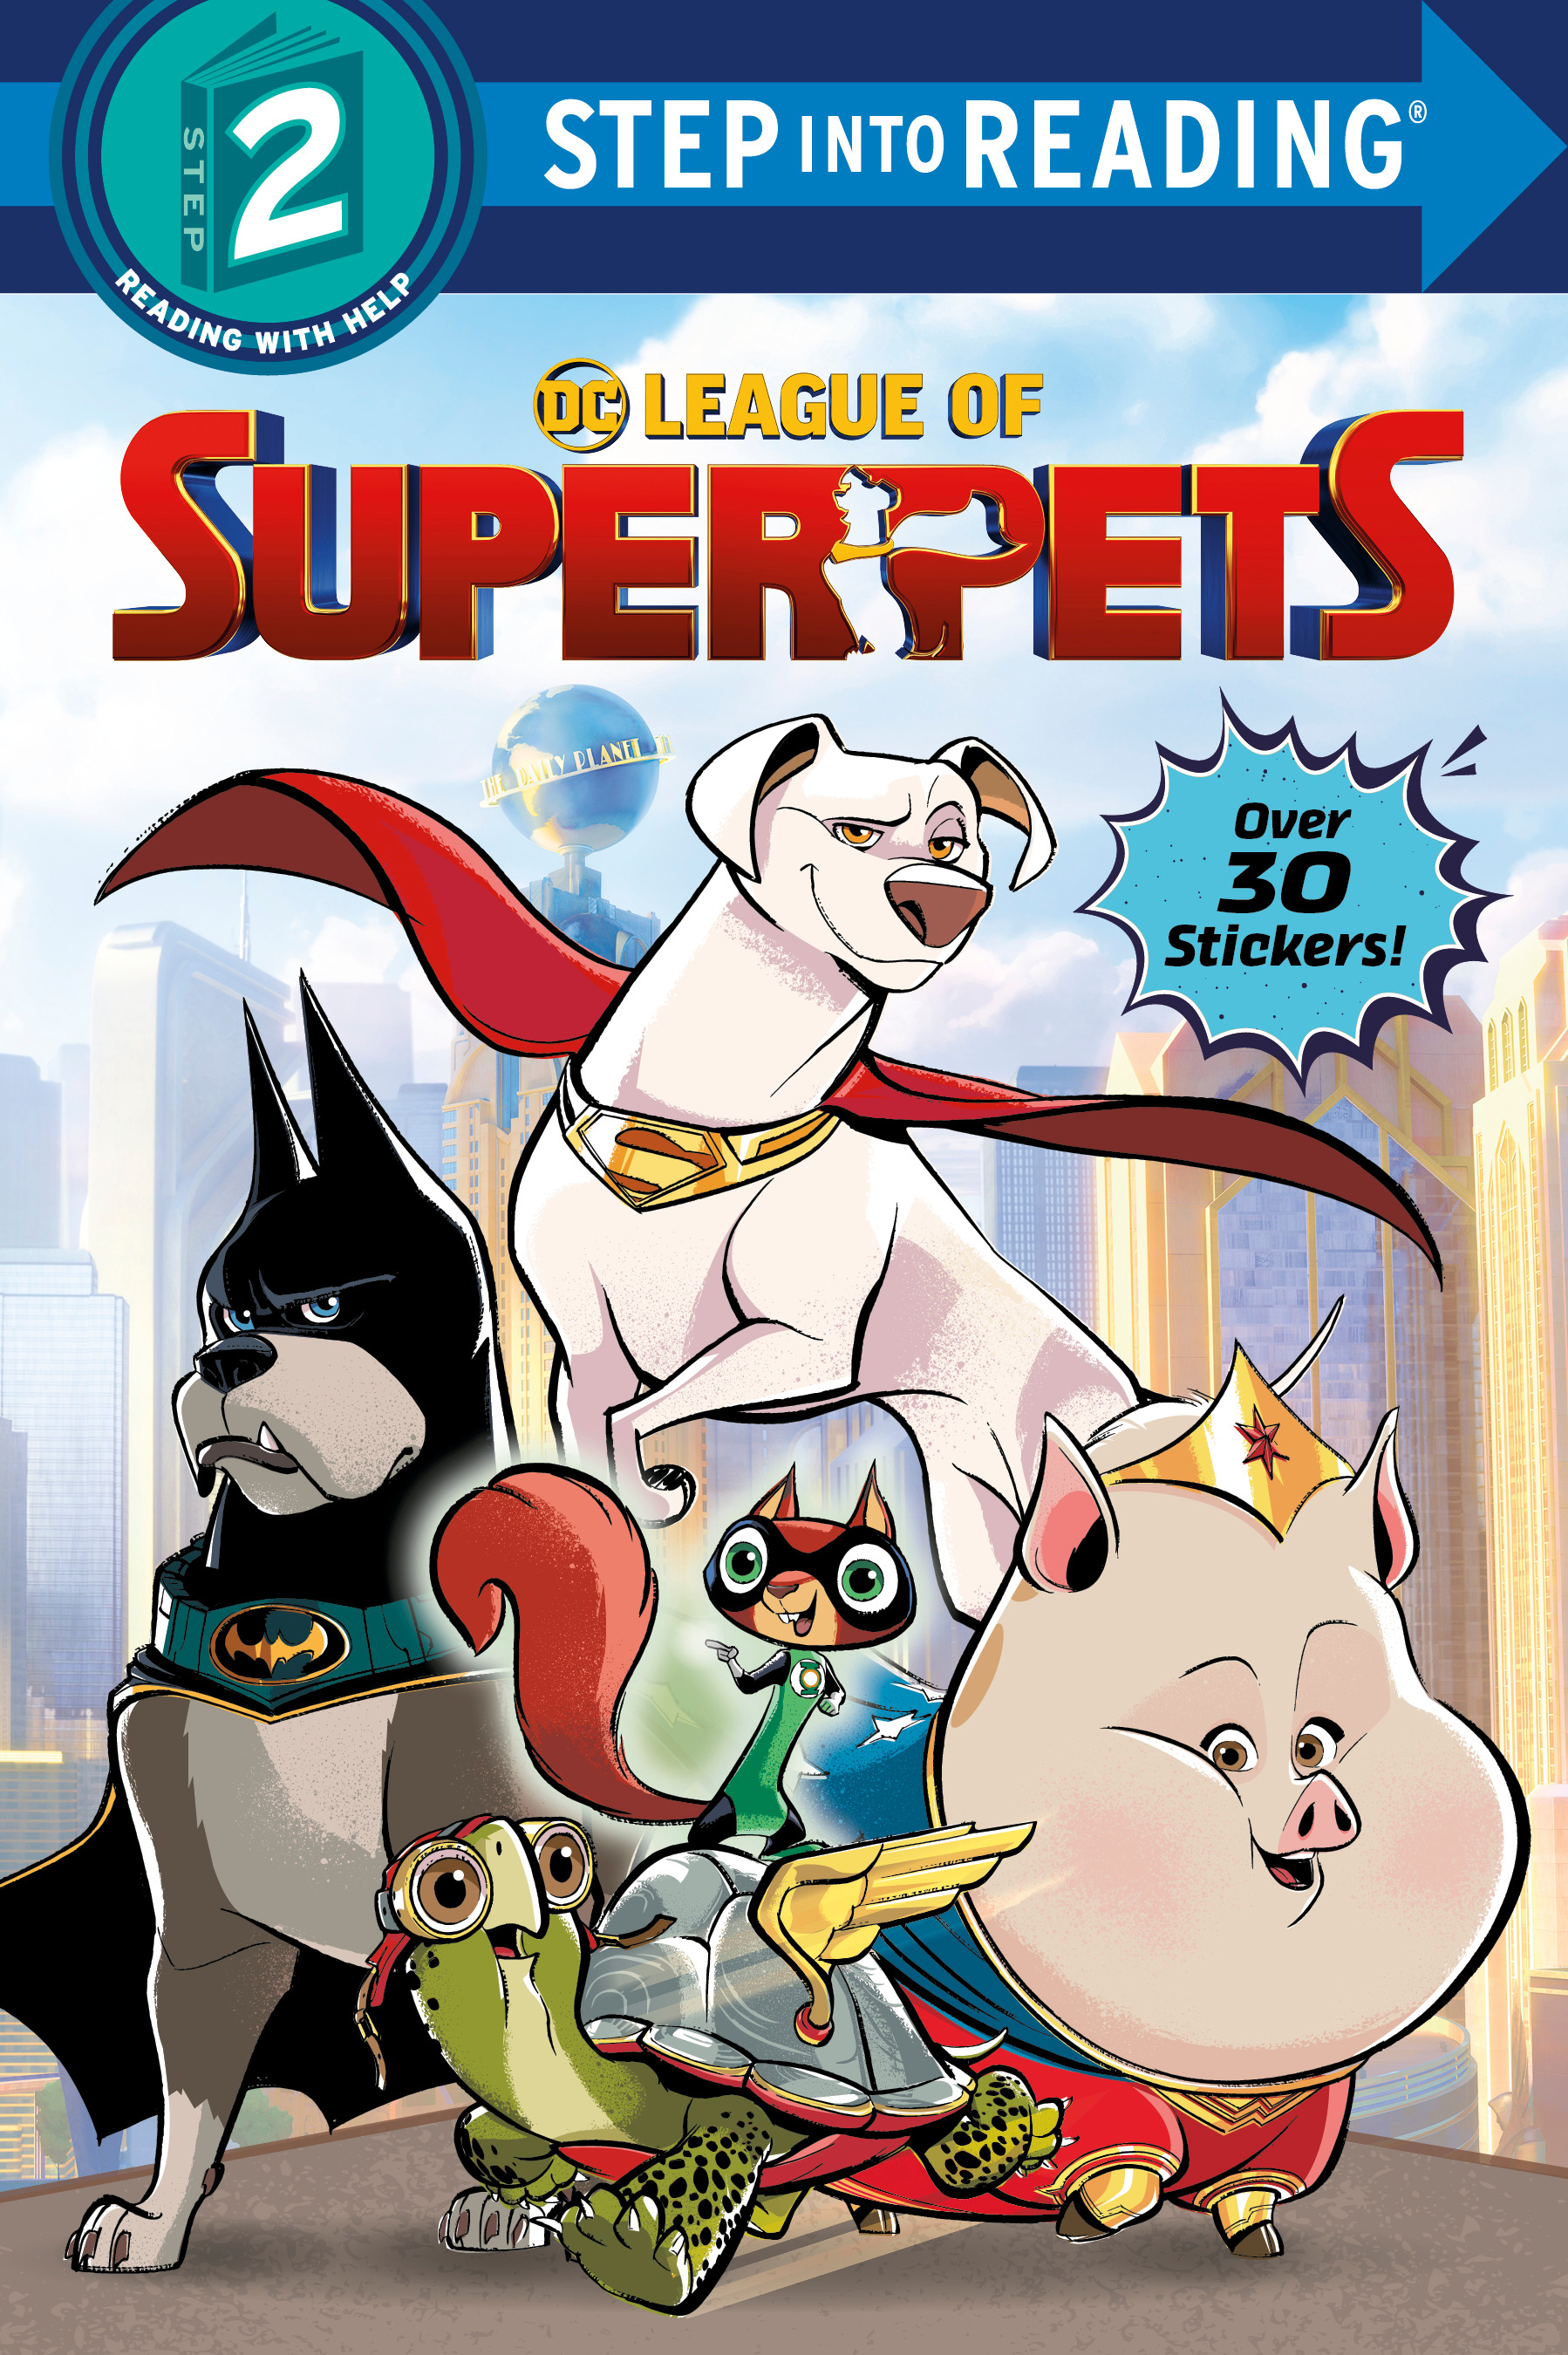 Step into Reading - DC League of Super-Pets : Includes over 30 stickers! | 